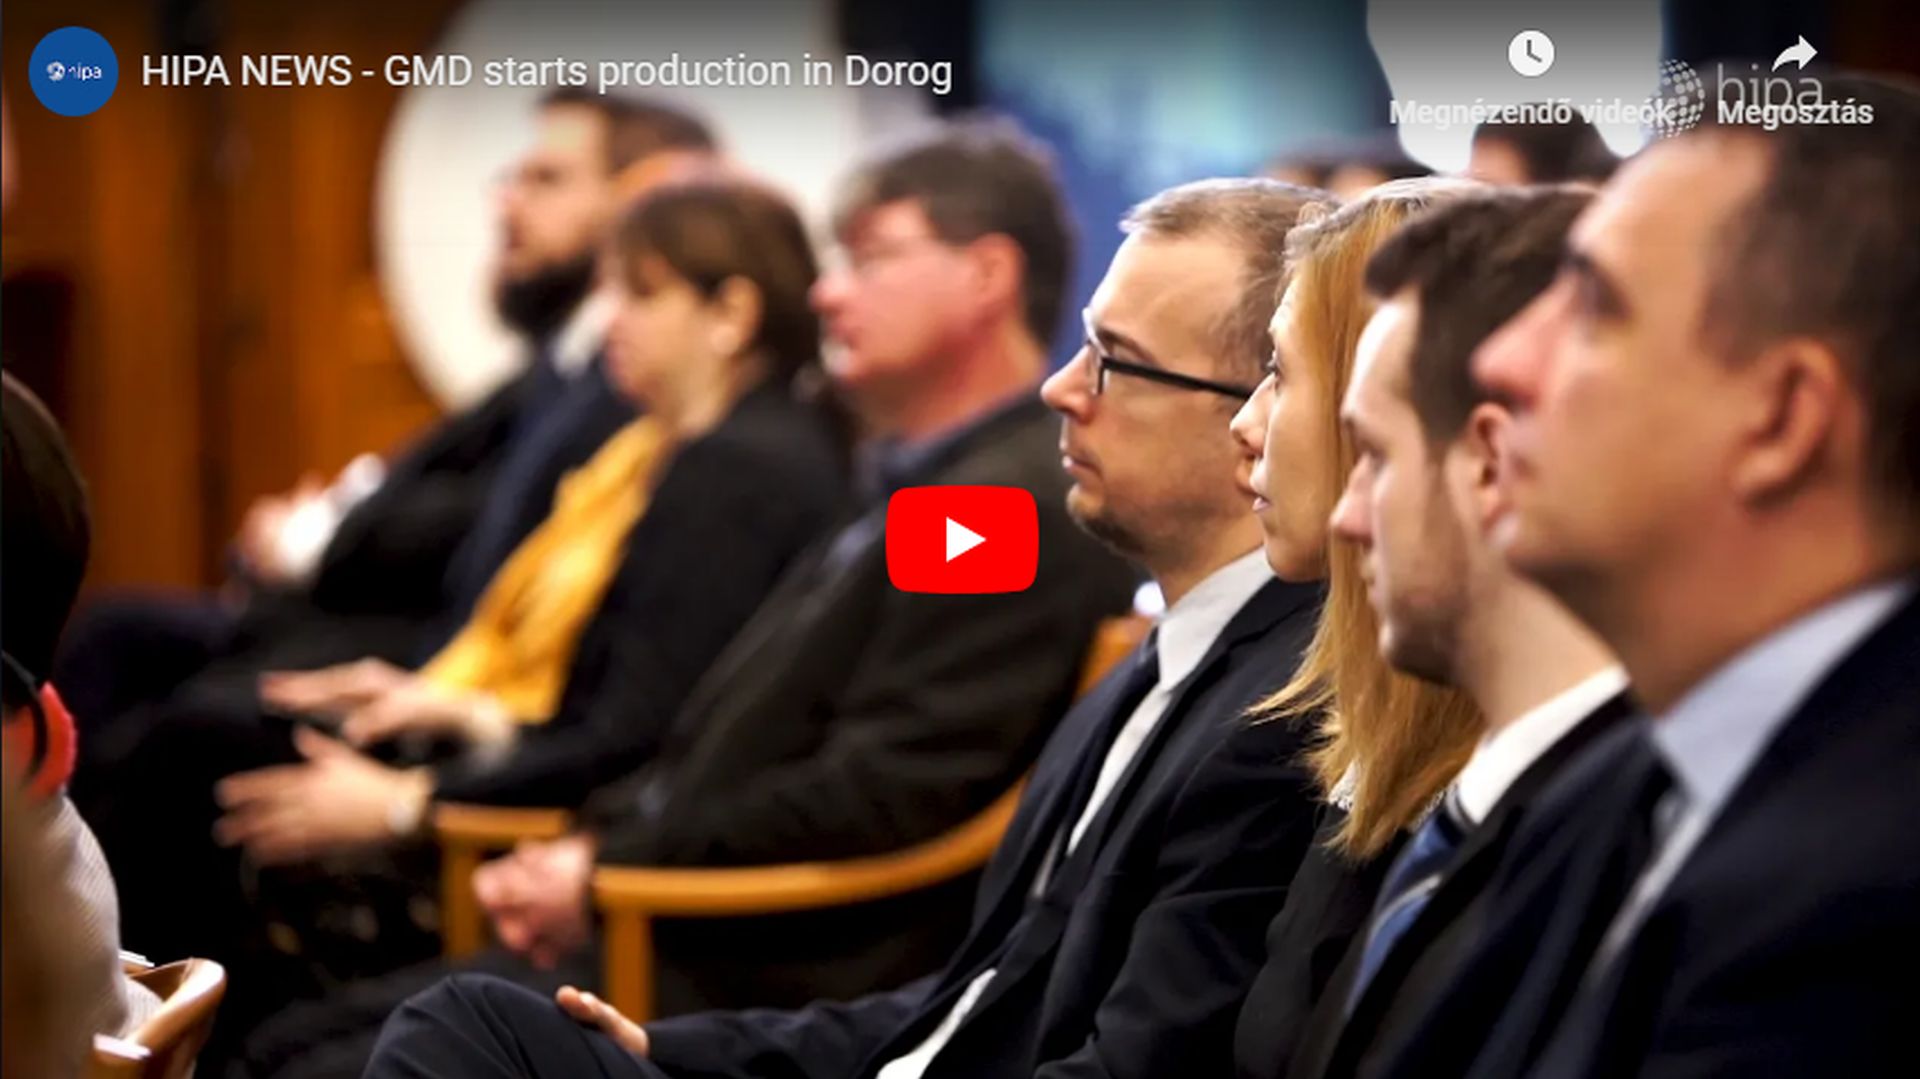 Manufacturing has been launched in the most modern European plant of the GMD Group in Dorog